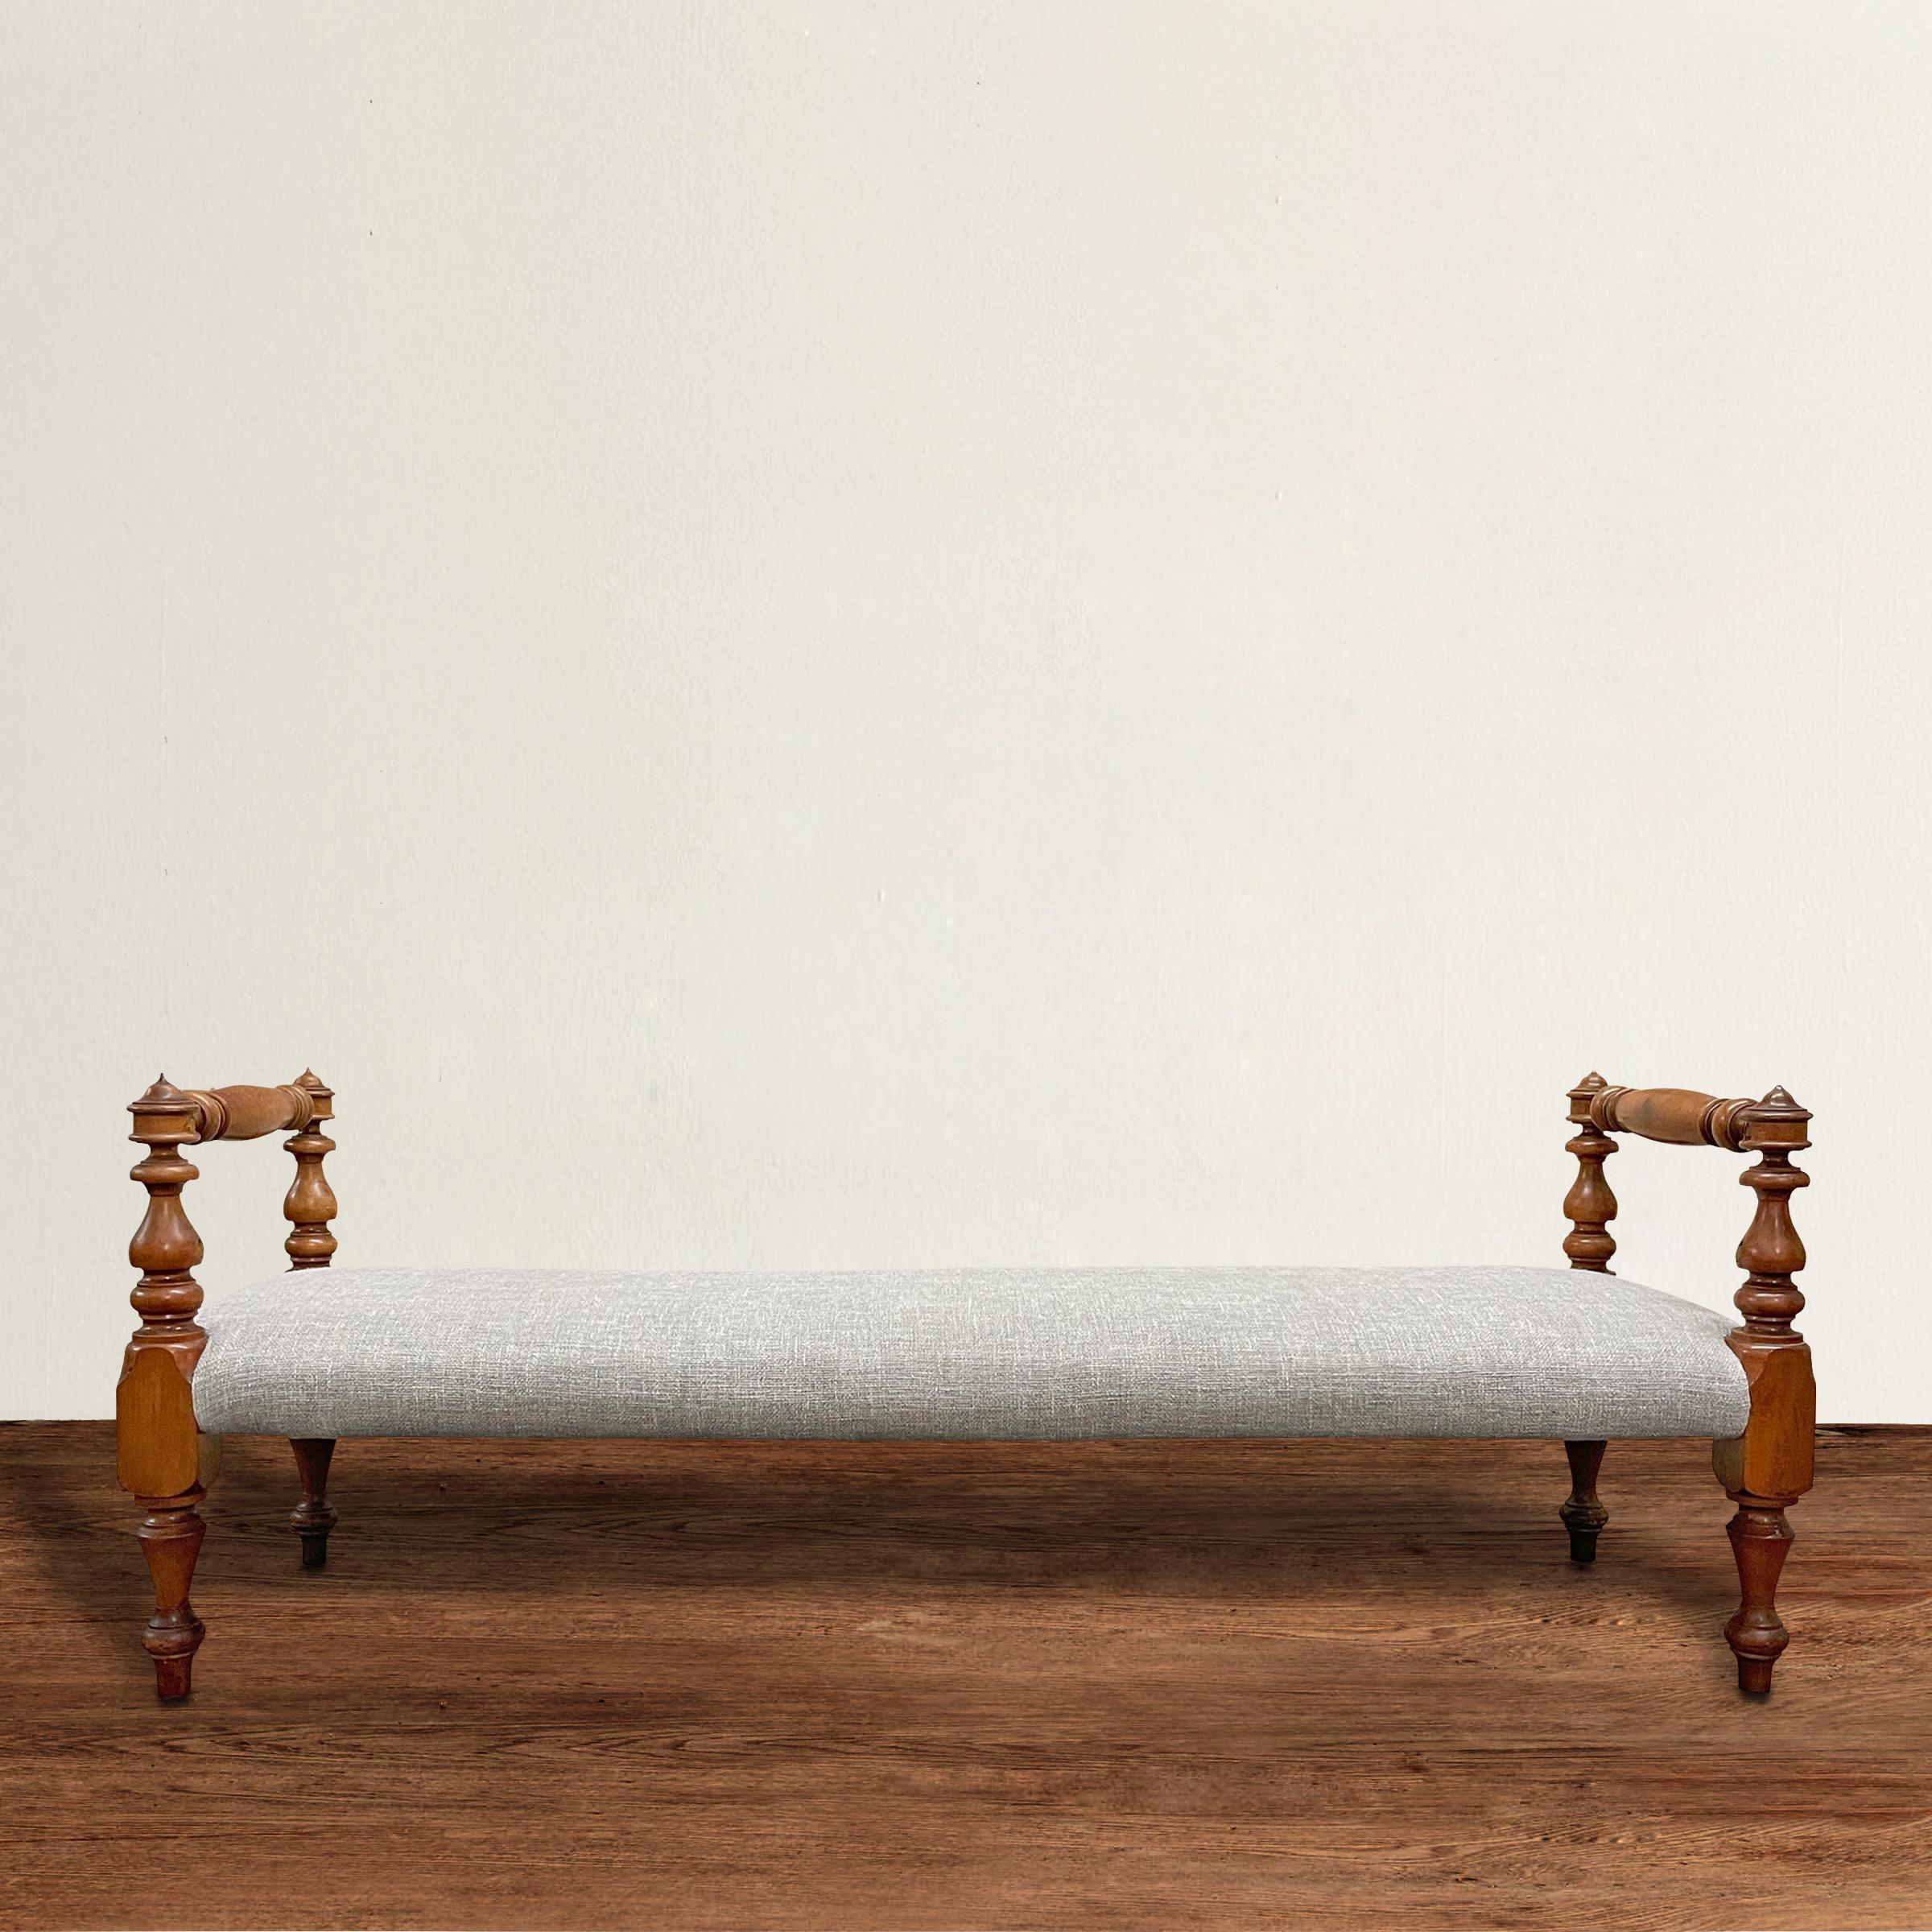 A wonderful mid-19th century American bench with turned maple arms, legs, and stretchers, and newly upholster in a chinky gray linen. Perfect at the end of a bed, in a hallway, or floating in your living room.